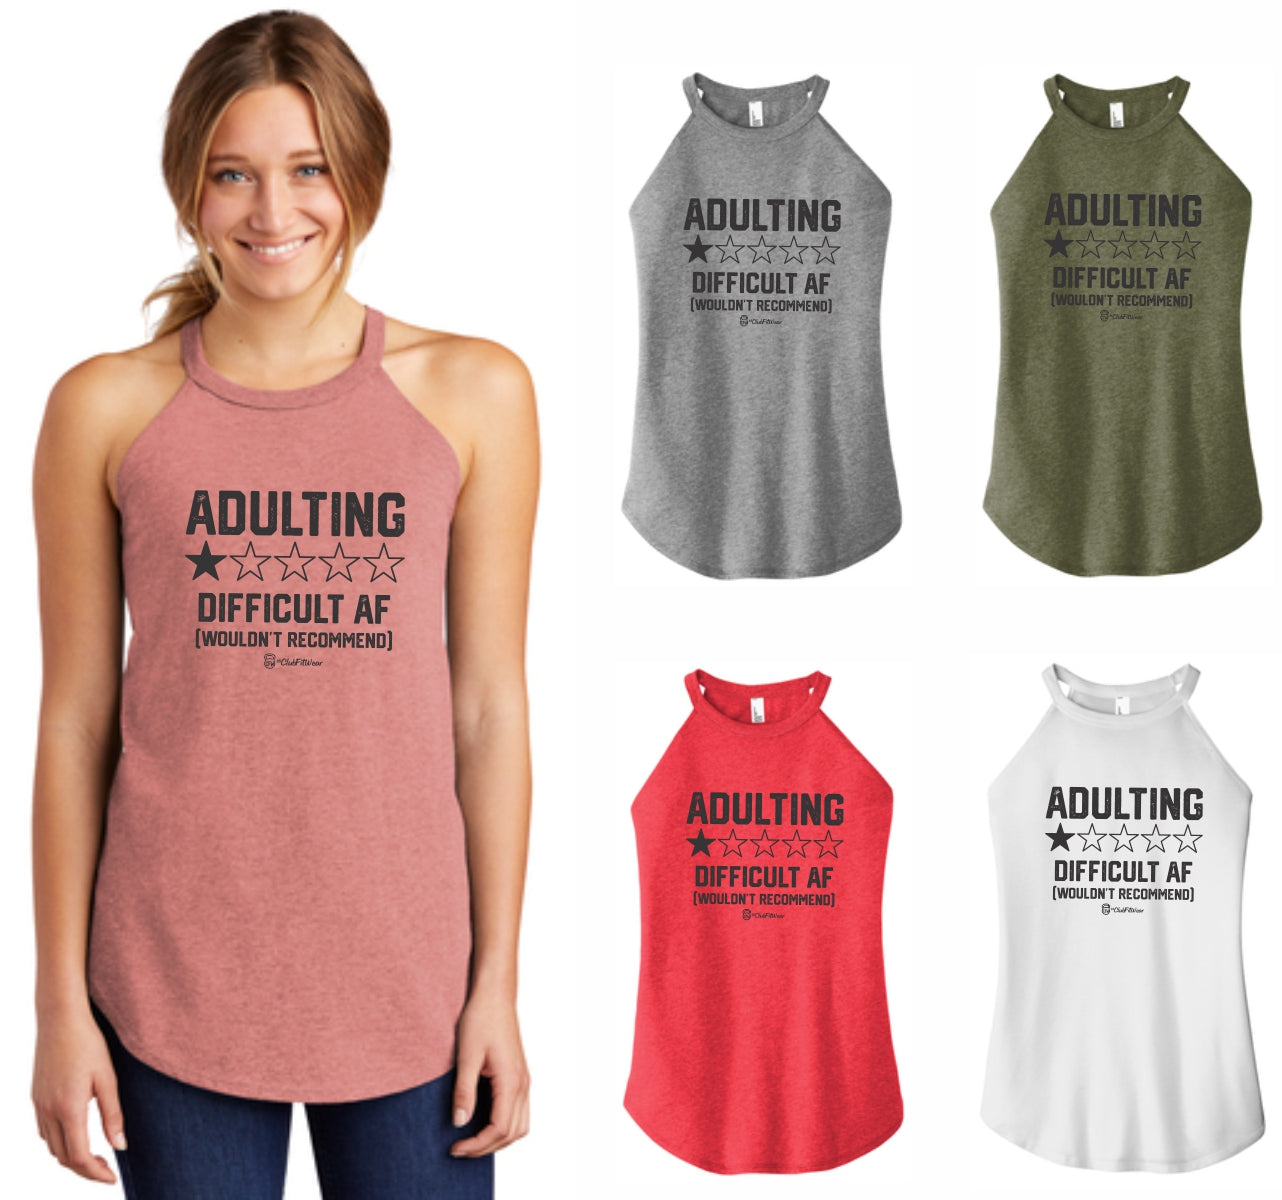 Adulting Difficult AF Wouldn't Recommend - High Neck Rocker Tank